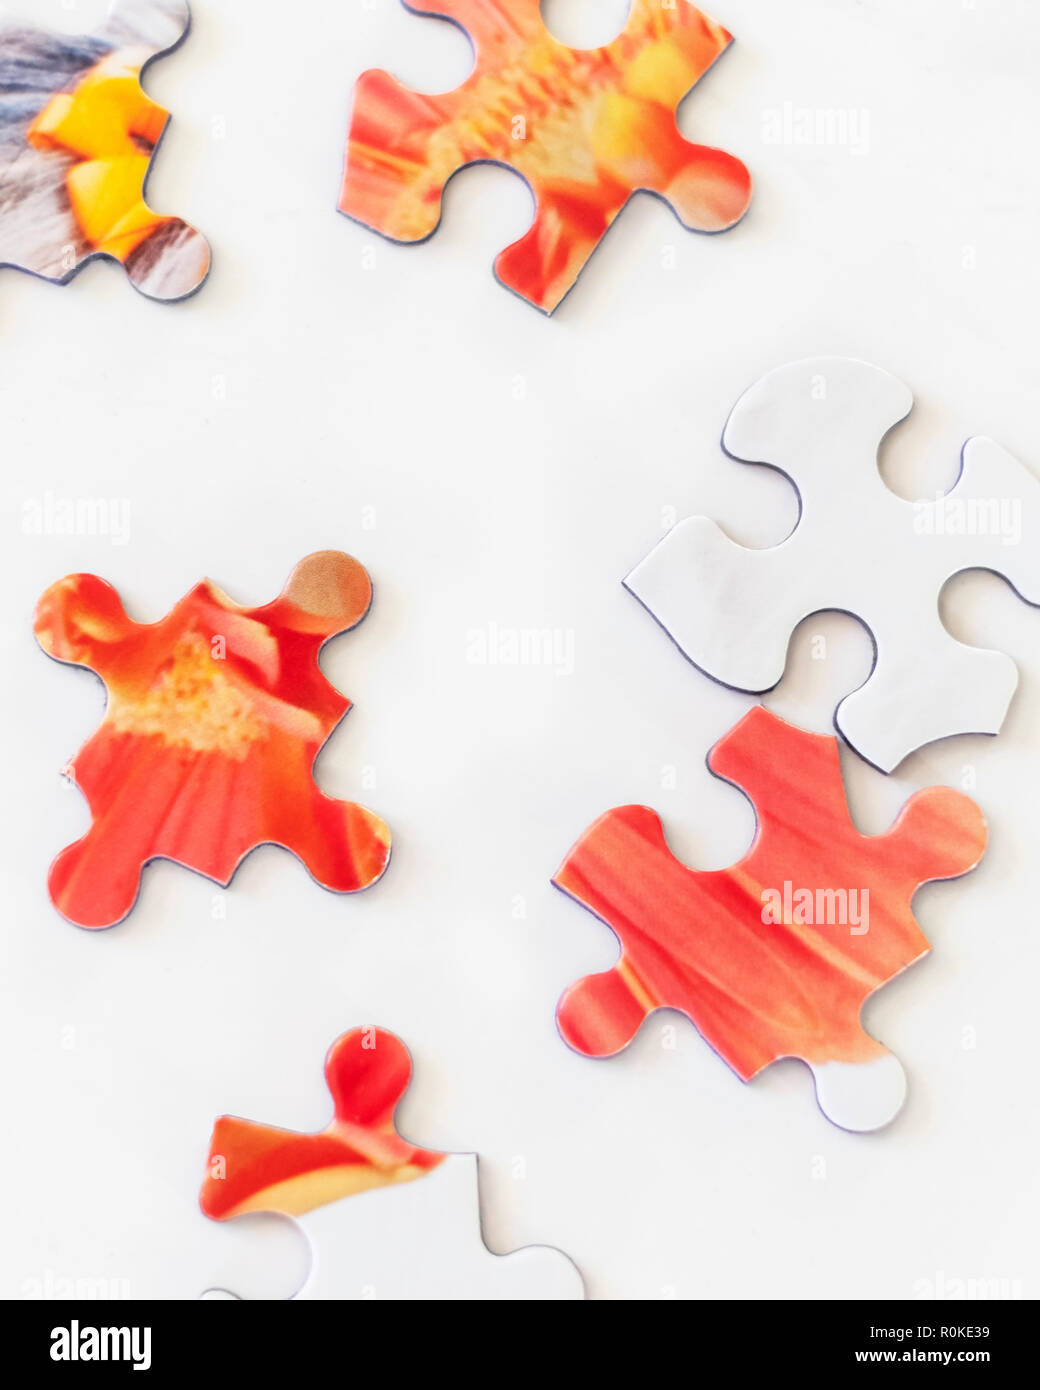 Puzzle pieces on white background. Representing solving problems, challenge, challenges, figuring out. Stock Photo